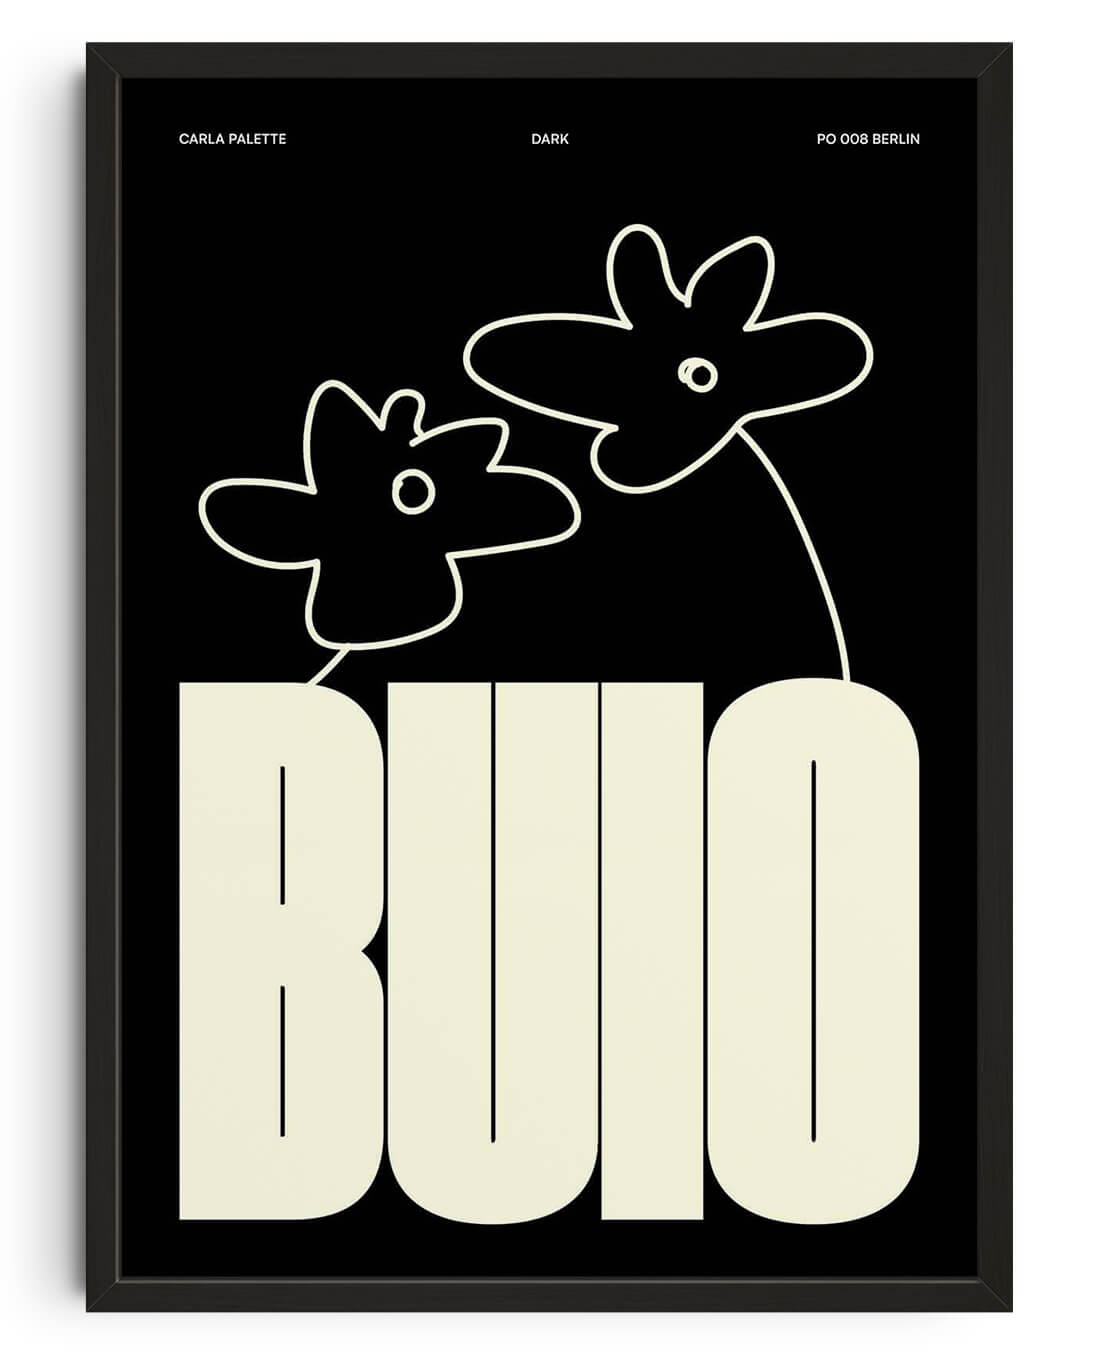 BUIO by Carla Palette contemporary wall art print from DROOL